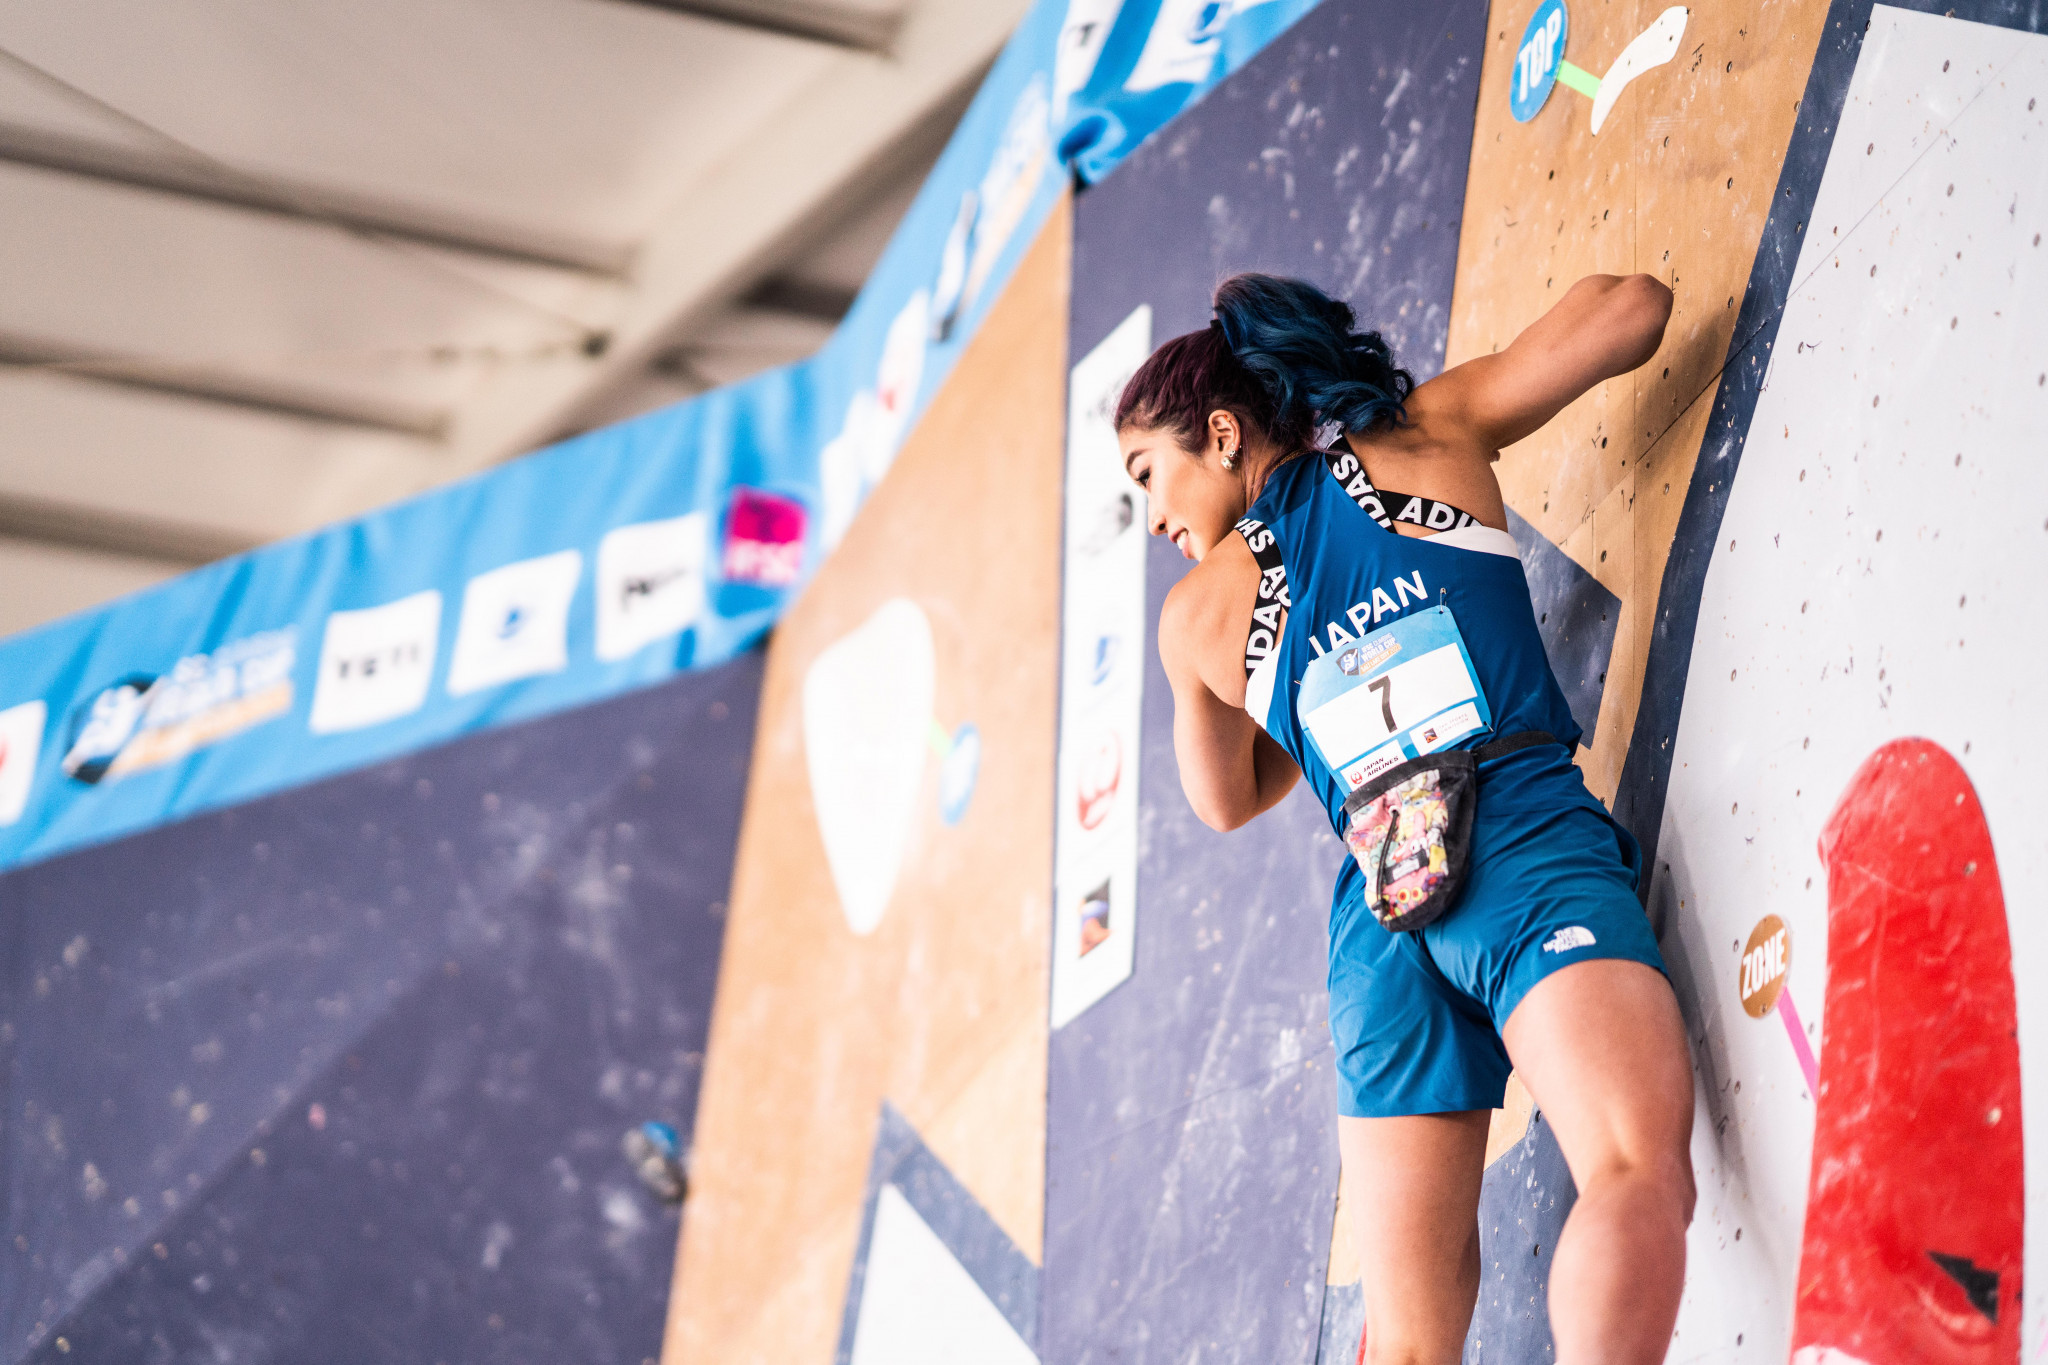 Olympic silver medallist Nonaka eases through boulder qualifying at IFSC World Cup in Salt Lake City